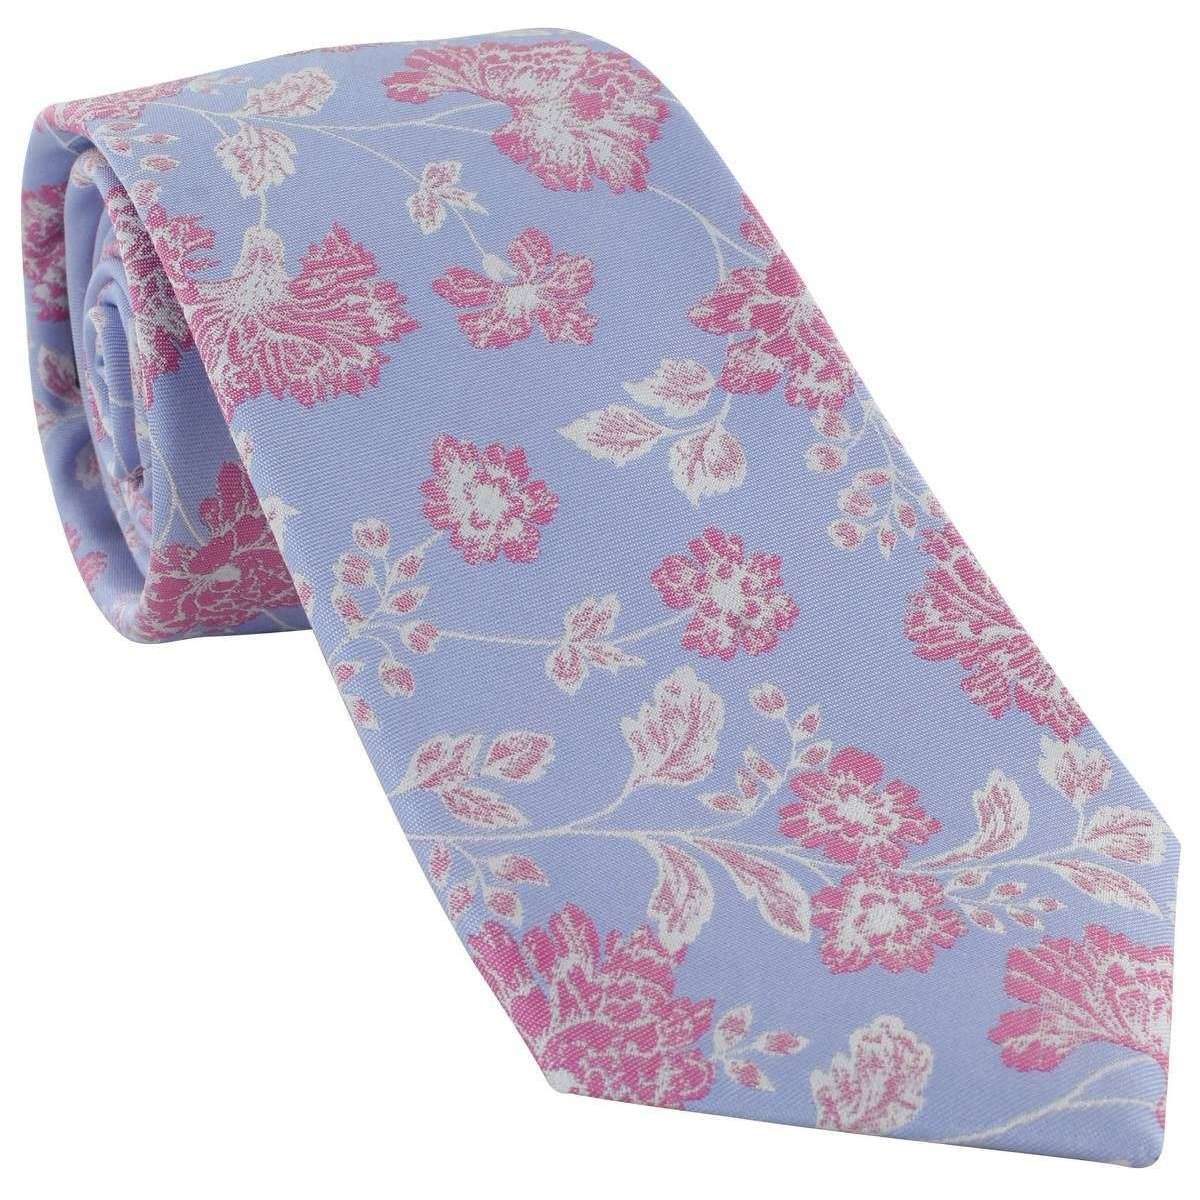 Michelsons of London Climbing Spring Floral Silk Tie - Light Blue/Pink